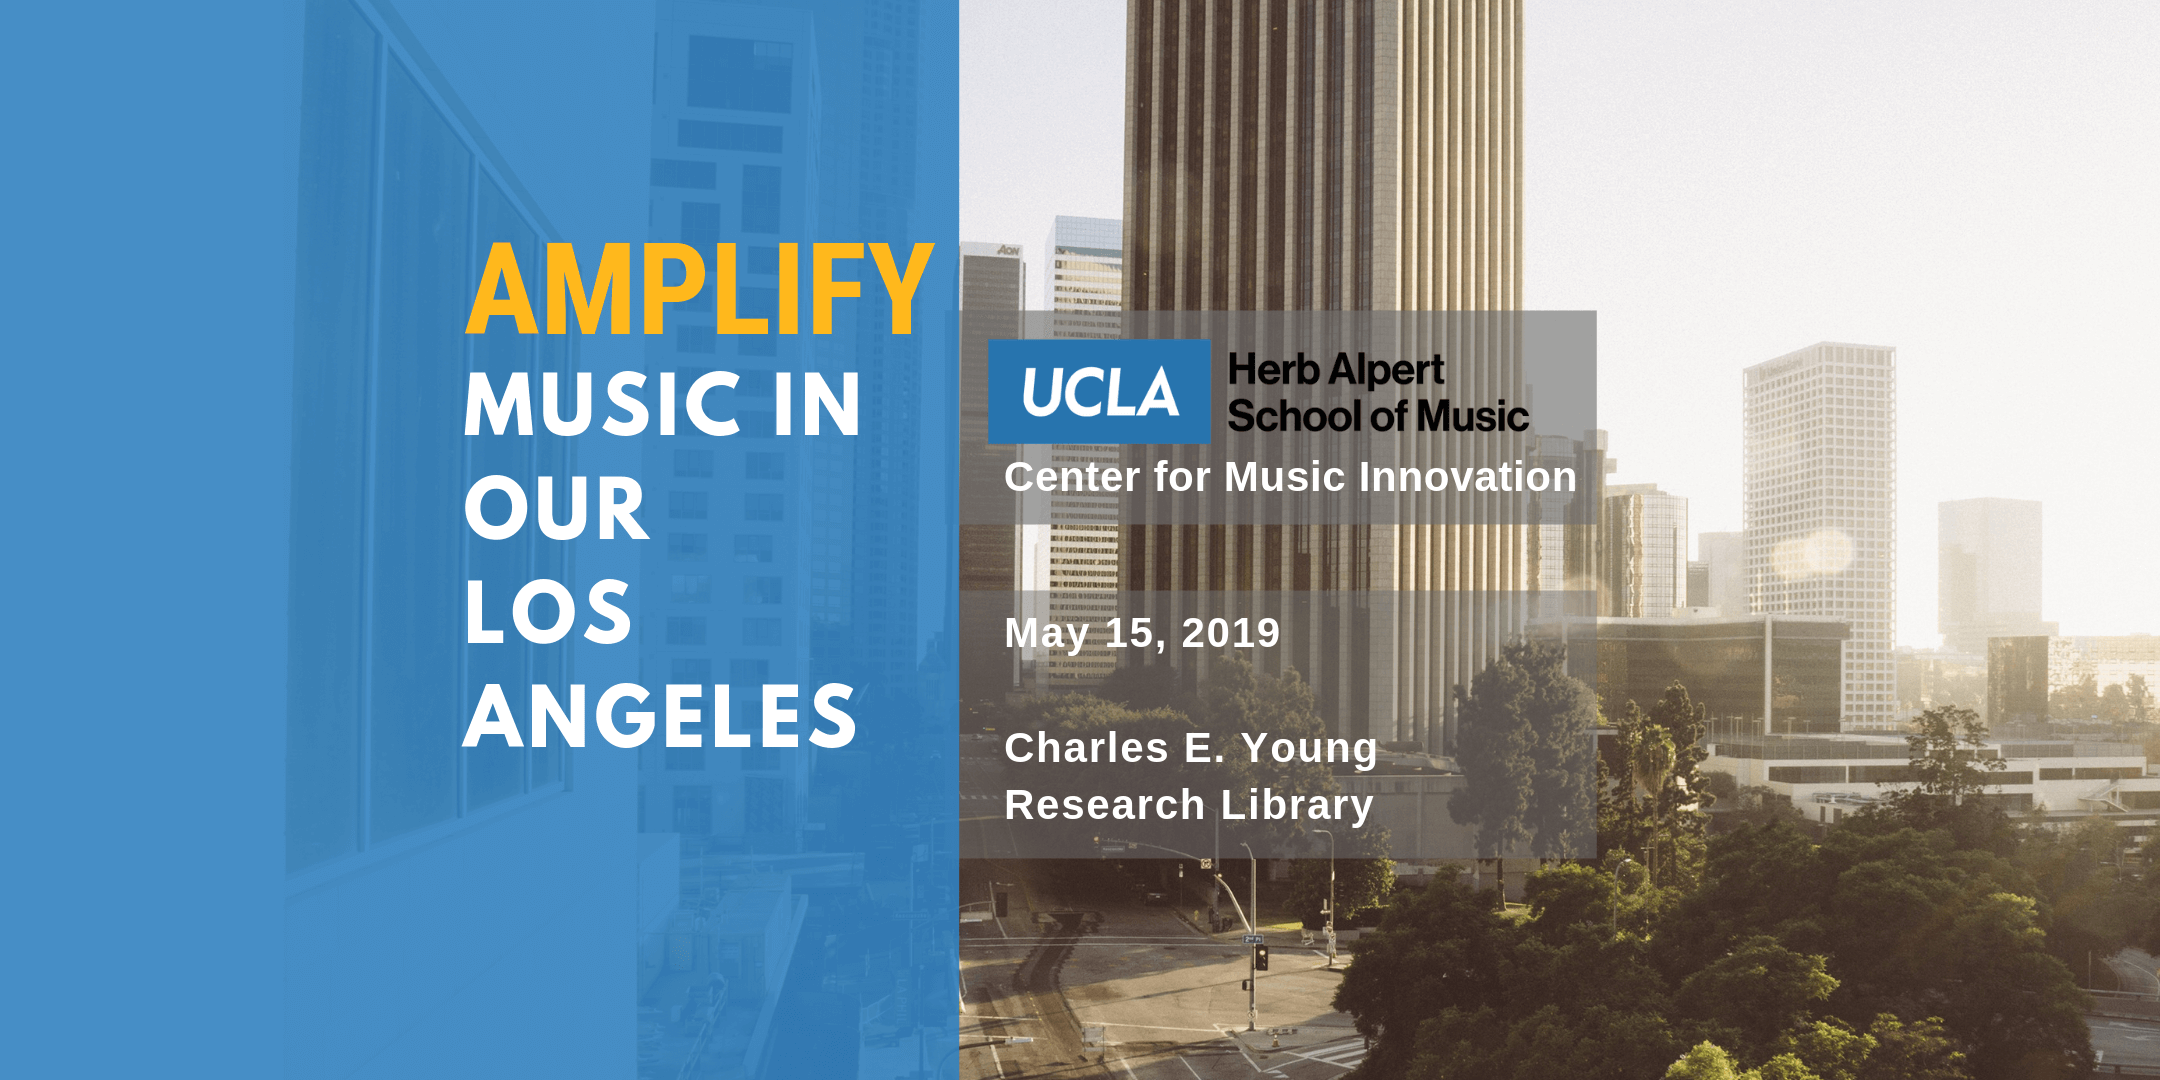 Amplify Music in Our Los Angeles